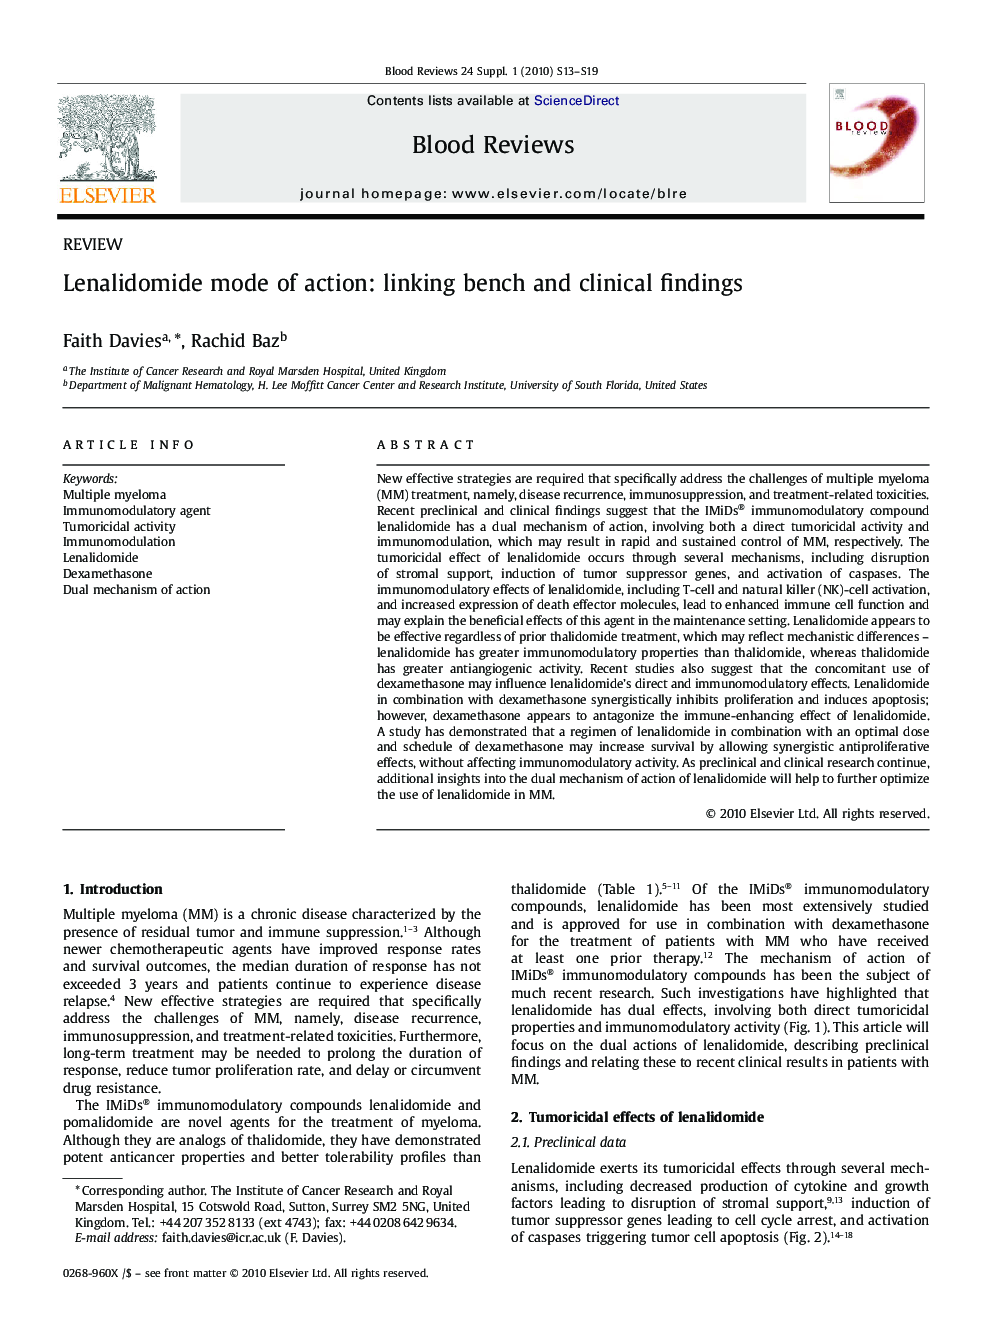 Lenalidomide mode of action: linking bench and clinical findings